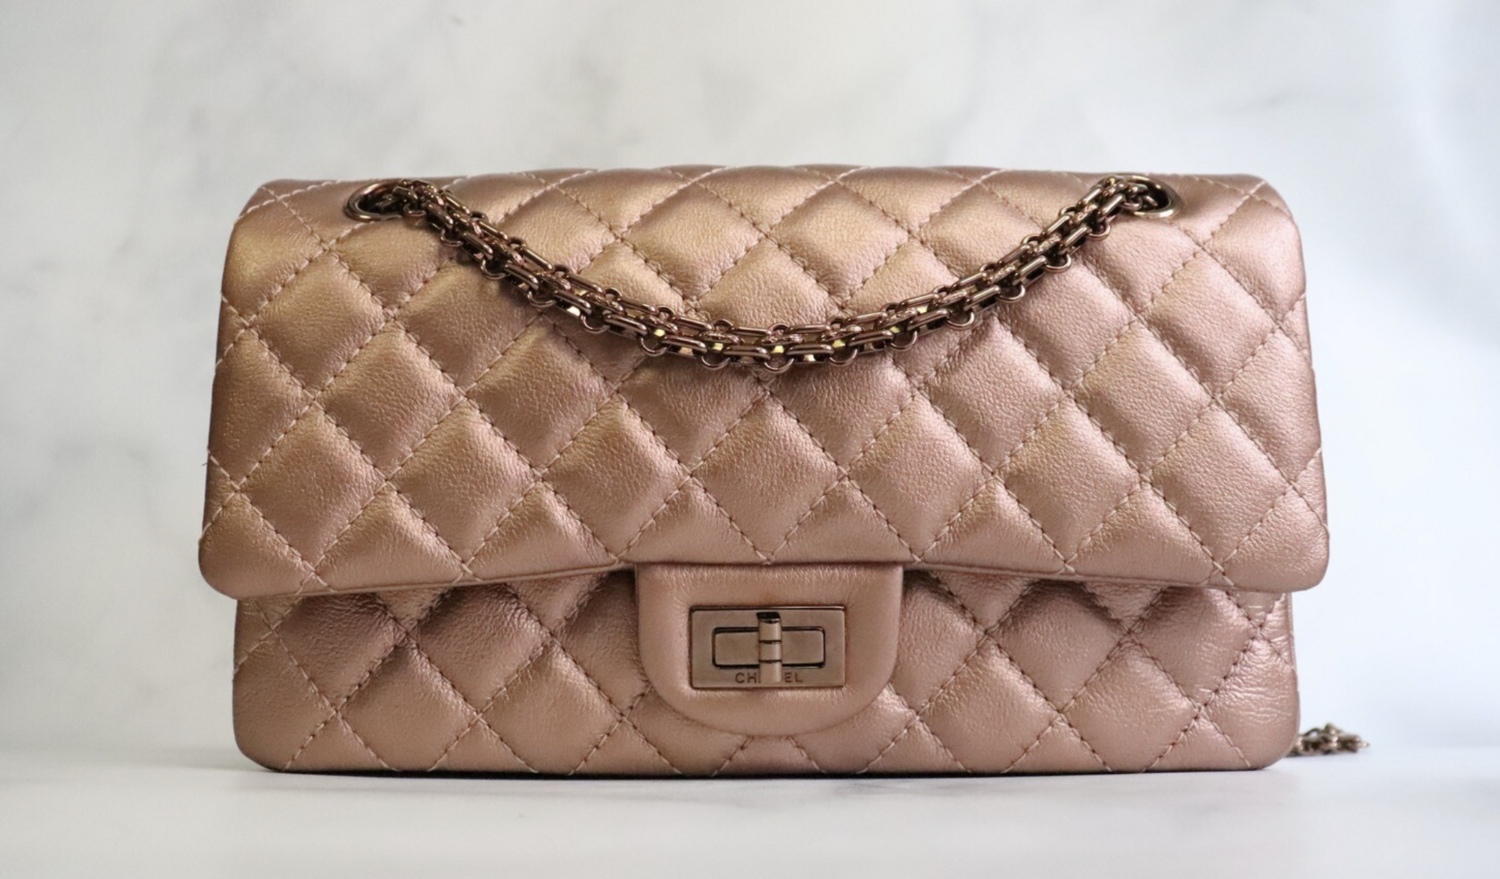 Chanel Reissue 226 Flap Rose Gold Calfskin Leather, Rosegold Hardware,  Preowned in Box